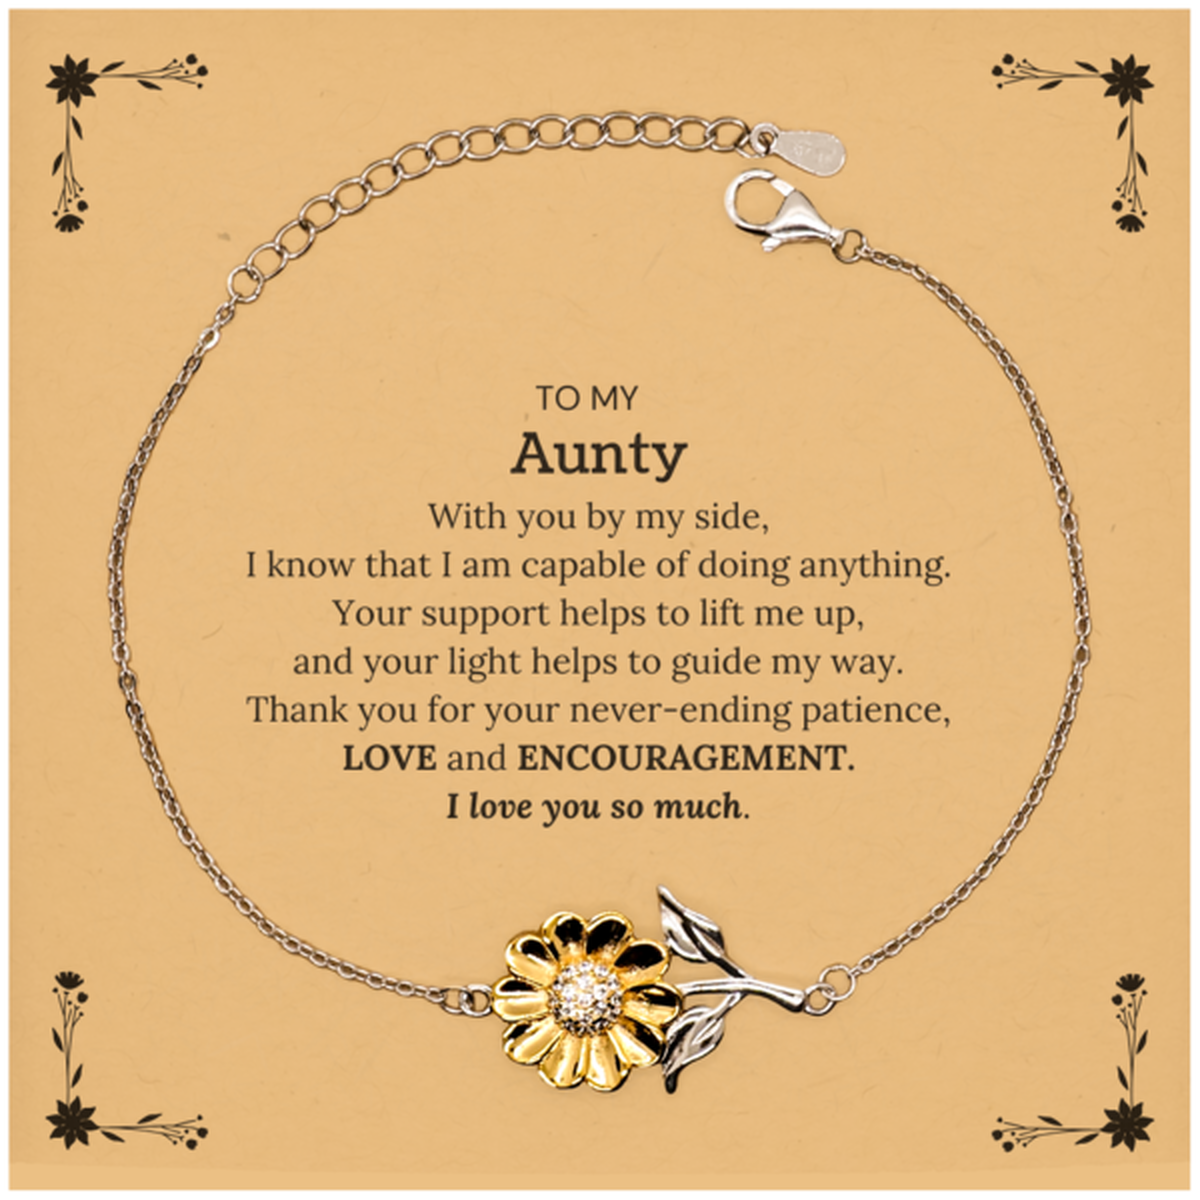 Appreciation Aunty Sunflower Bracelet Gifts, To My Aunty Birthday Christmas Wedding Keepsake Gifts for Aunty With you by my side, I know that I am capable of doing anything. I love you so much